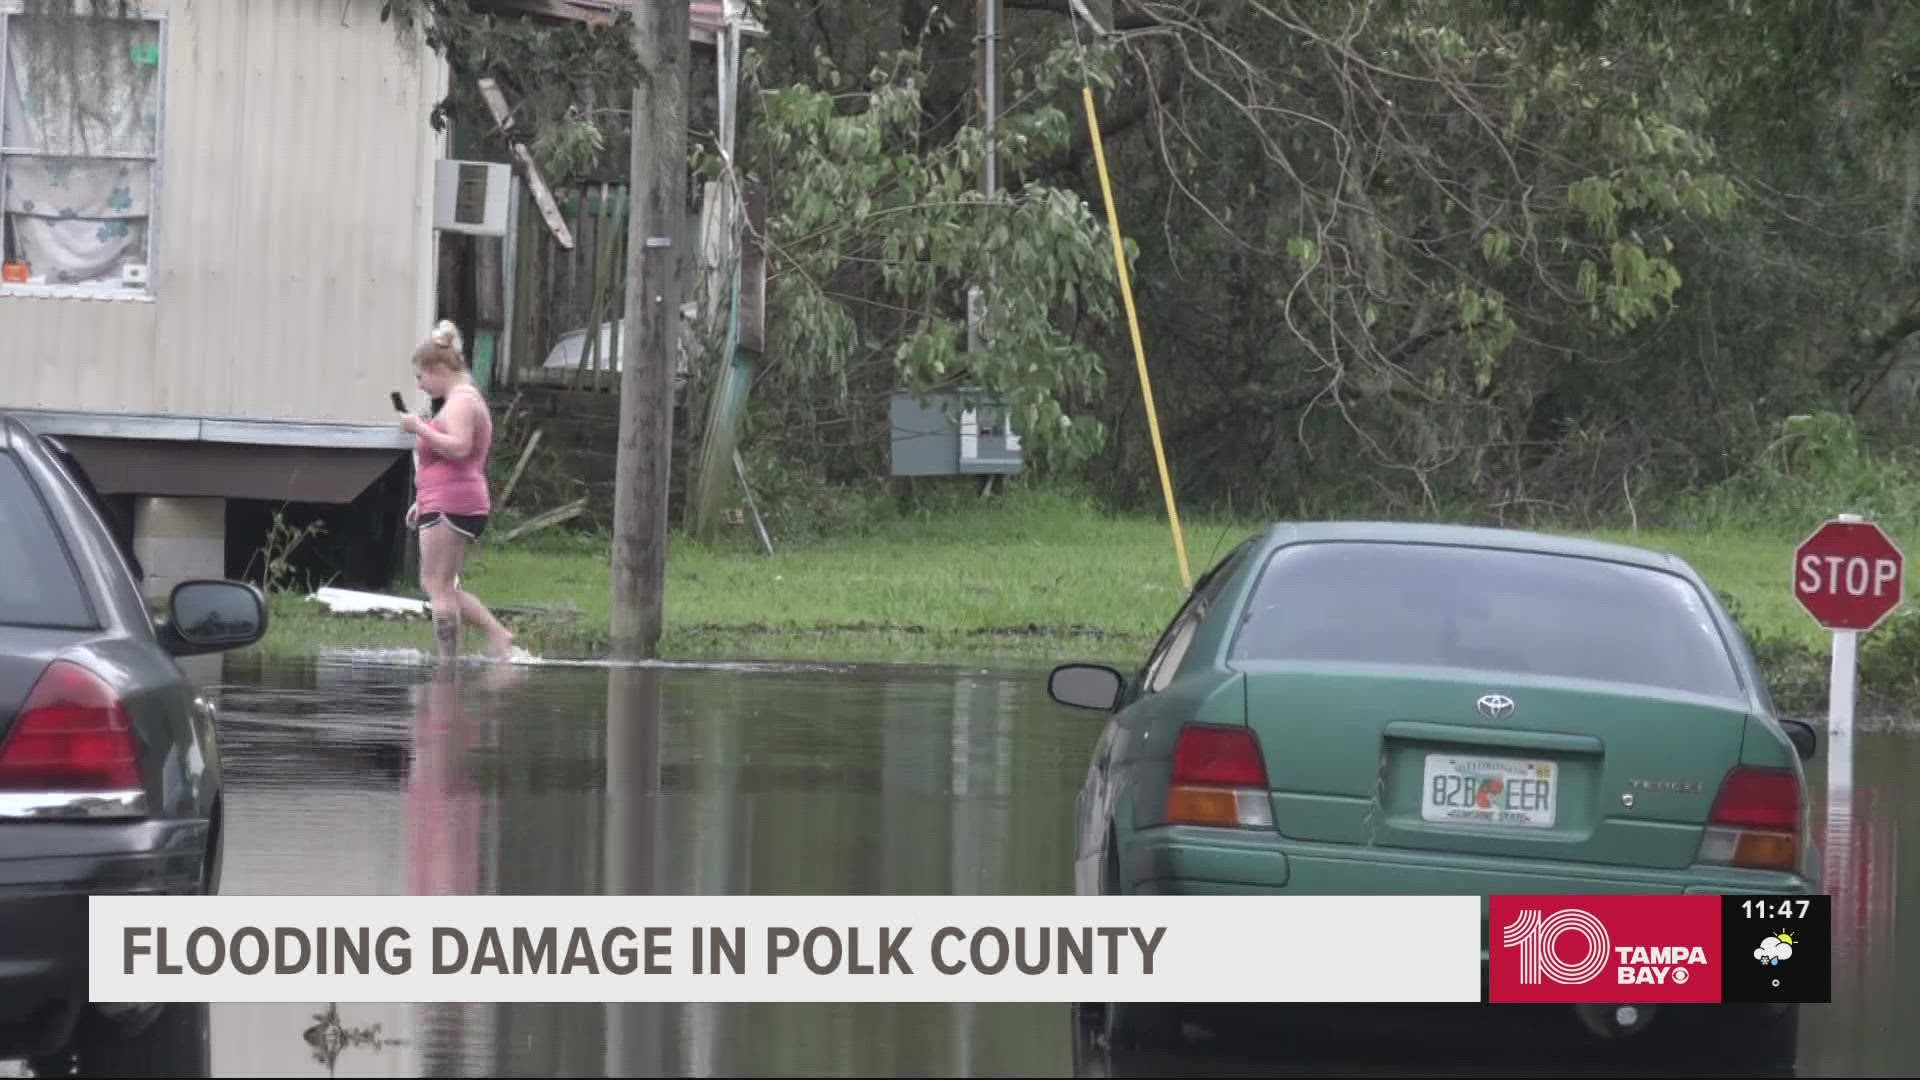 Flooded roads and damage across the county was seen after the hurricane passed through Florida.